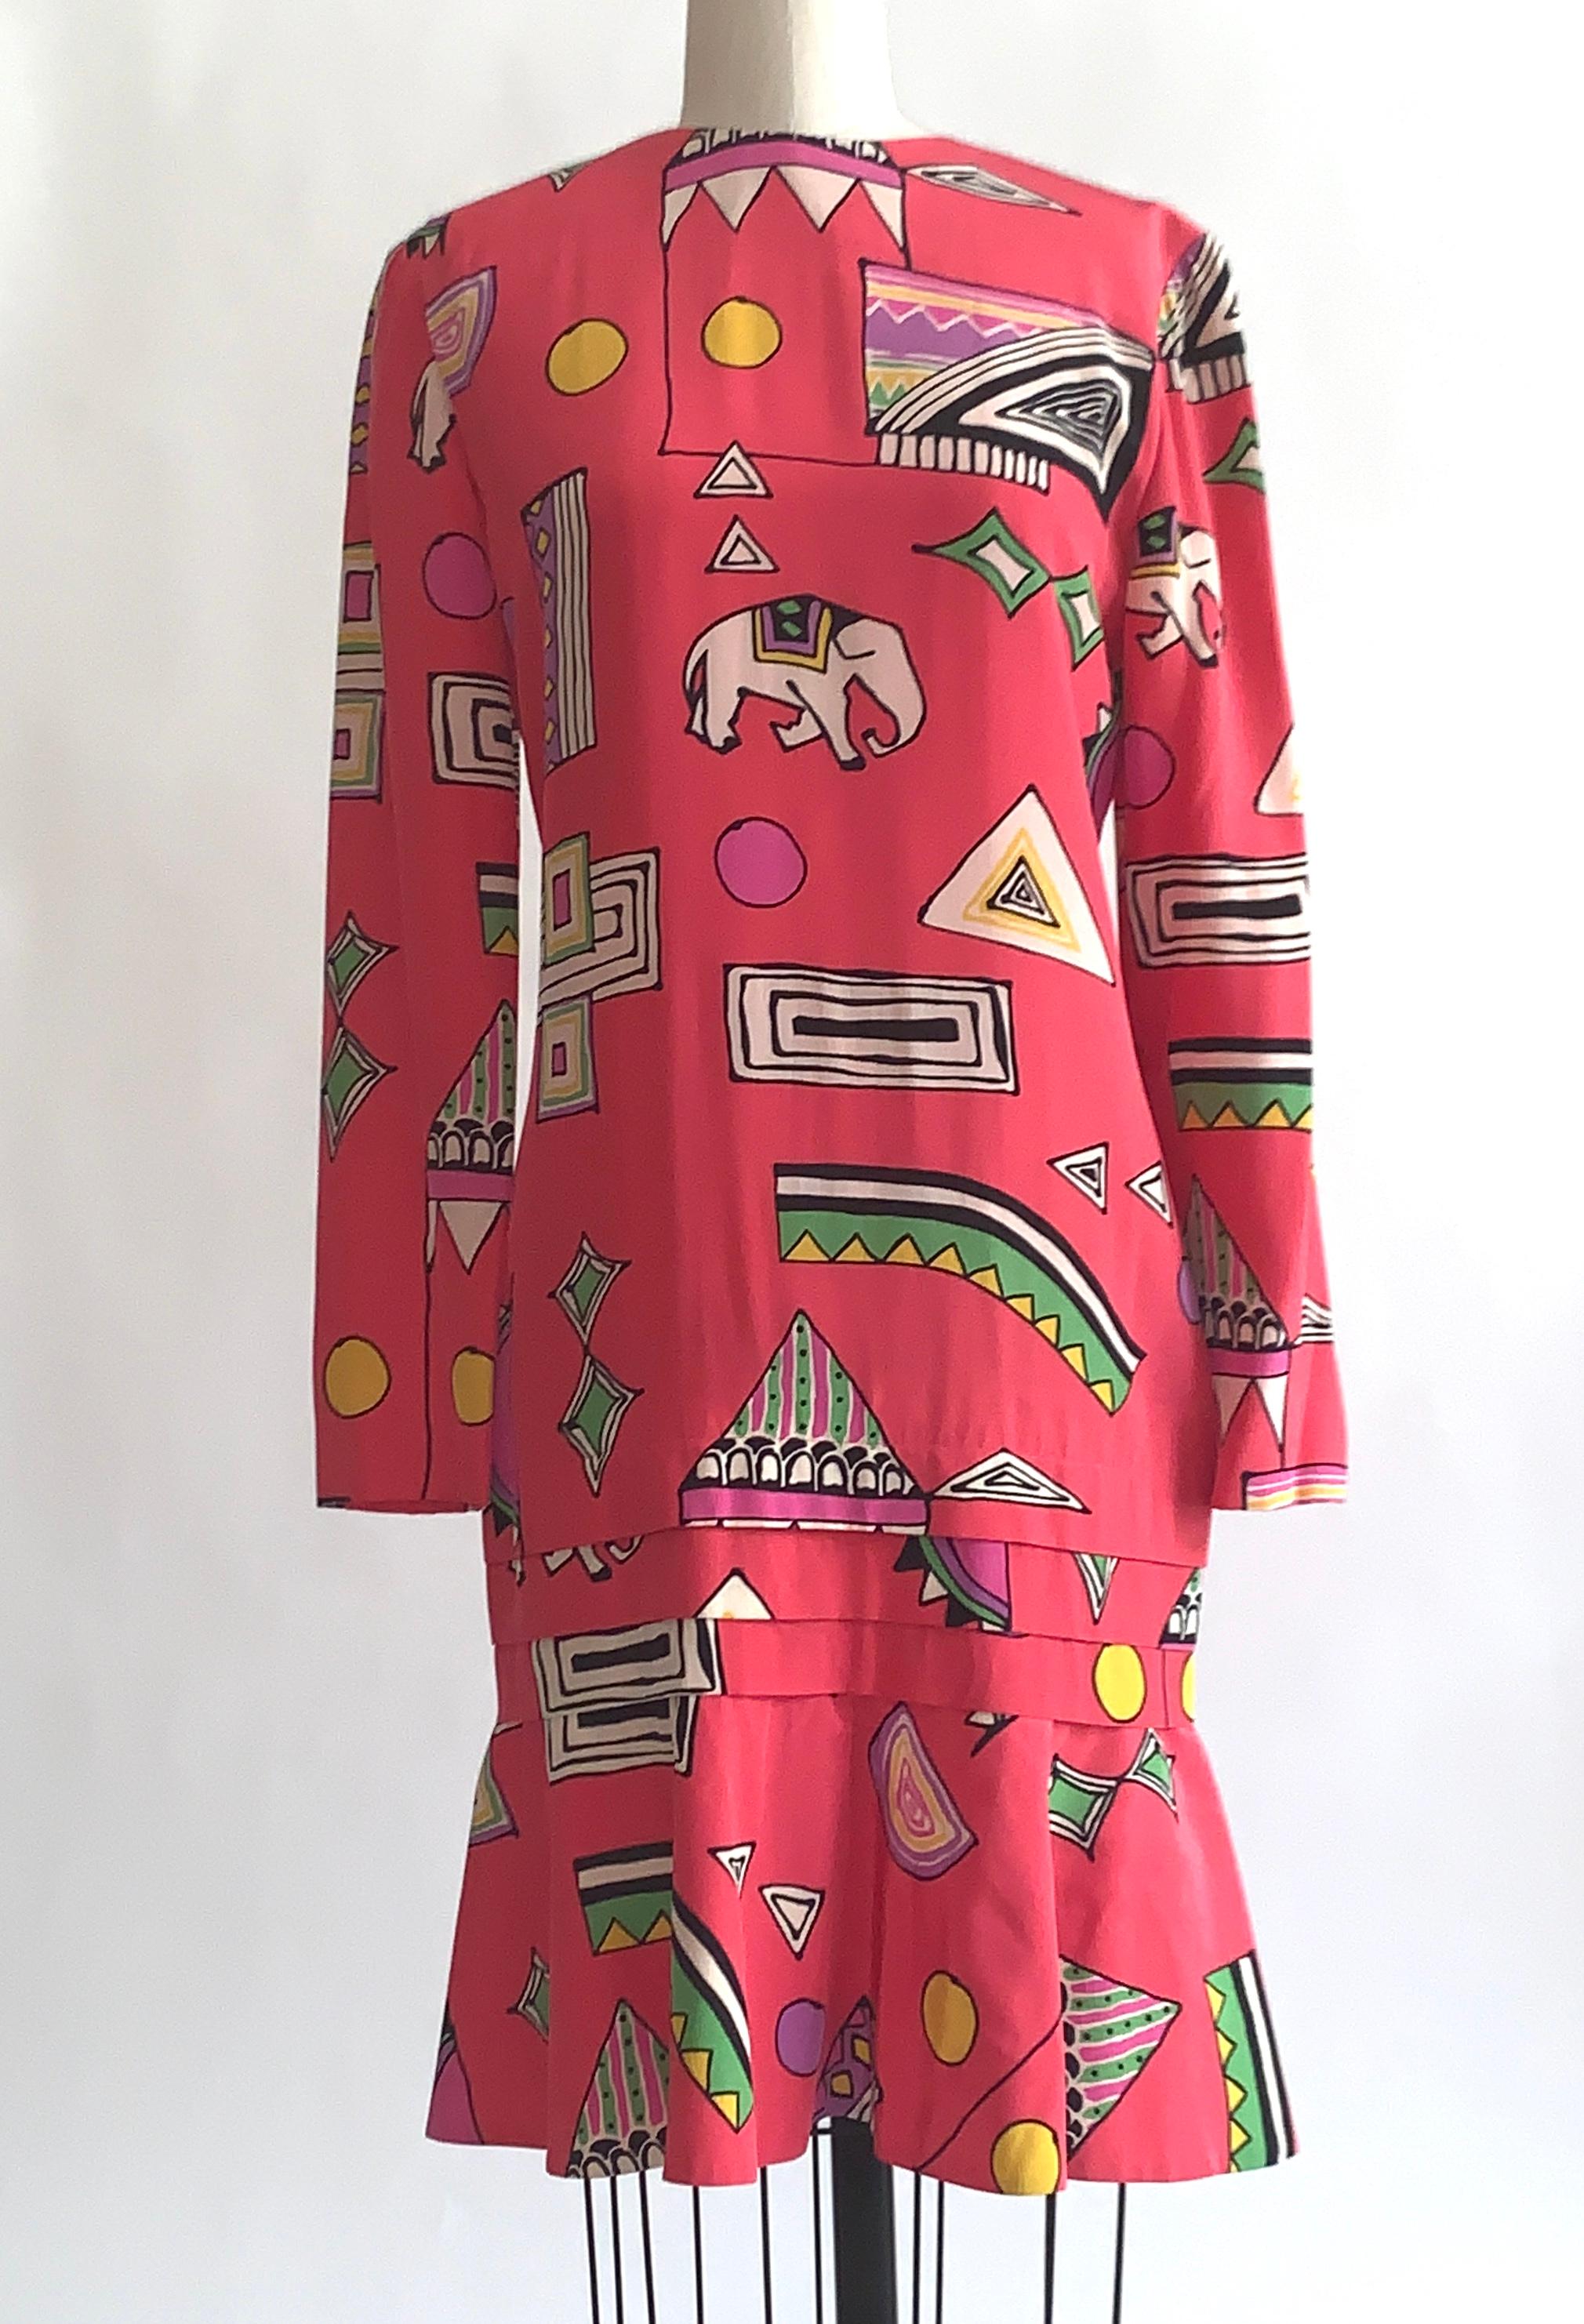 Helga bright pink vintage dress with vibrant multi color abstract circus print throughout featuring elephants and circus tents. Flounced hem with pleat detail above. Long sleeve. Back zip. 

No content label, feels like silk, but could be a blend.